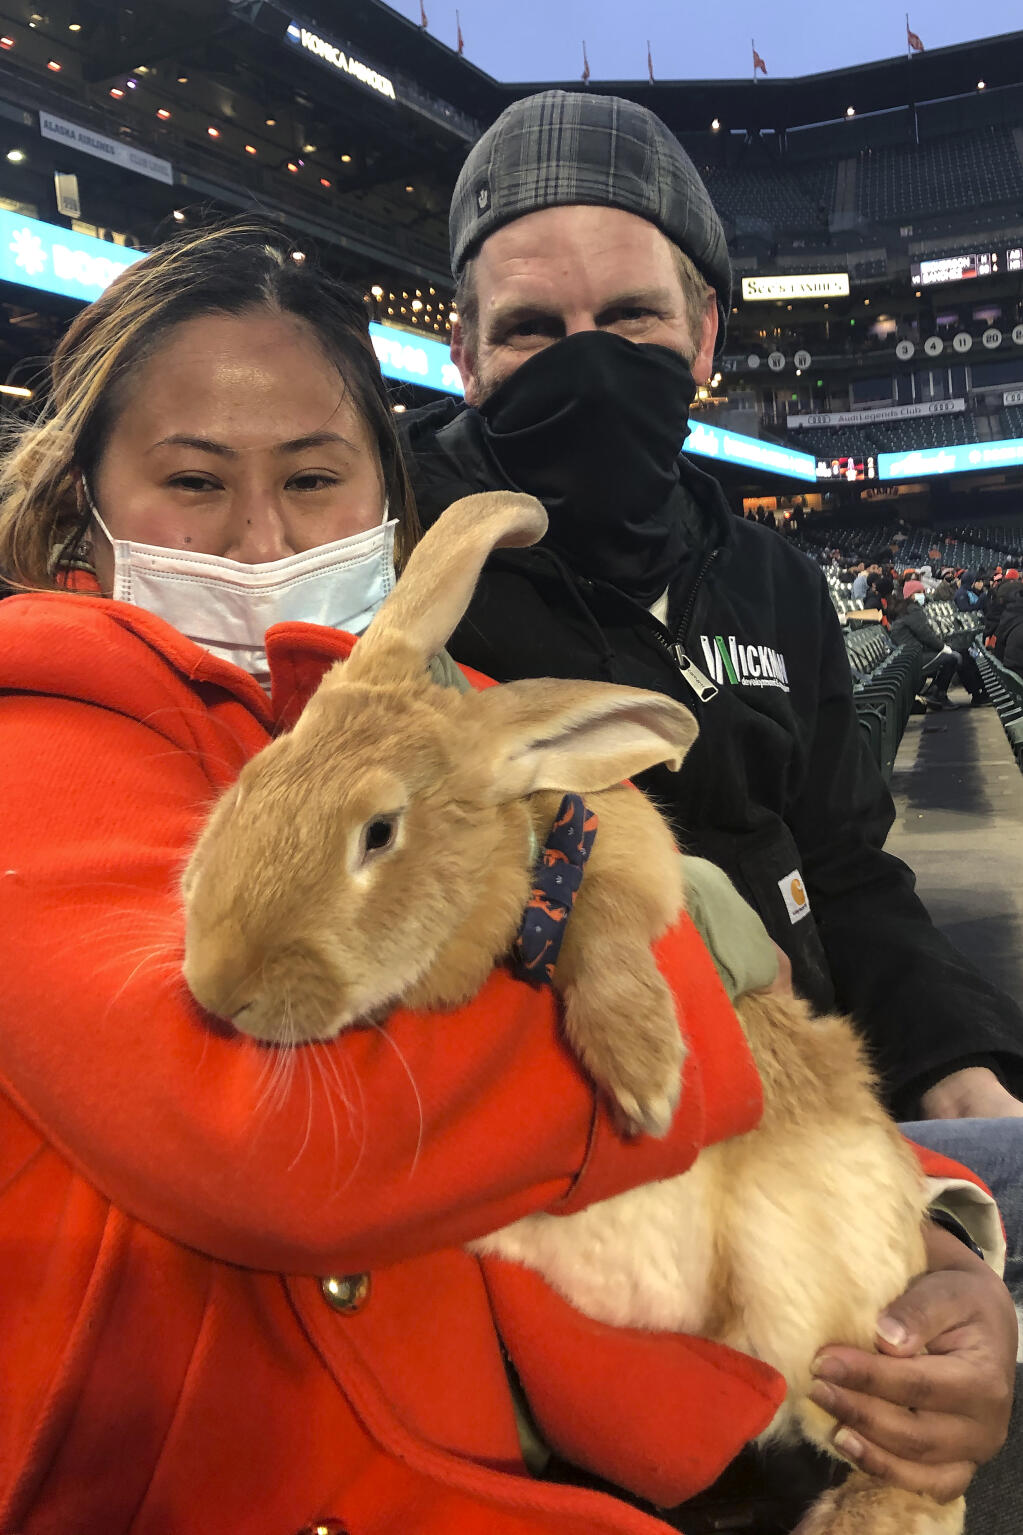 Kei Kato, left, and her fiance, Josh Row, hold a therapy bunny named Alex during a baseball game between the San Francisco Giants and the Miami Marlins in San Francisco, Thursday, April 22, 2021. (AP Photo/Janie McCauley)